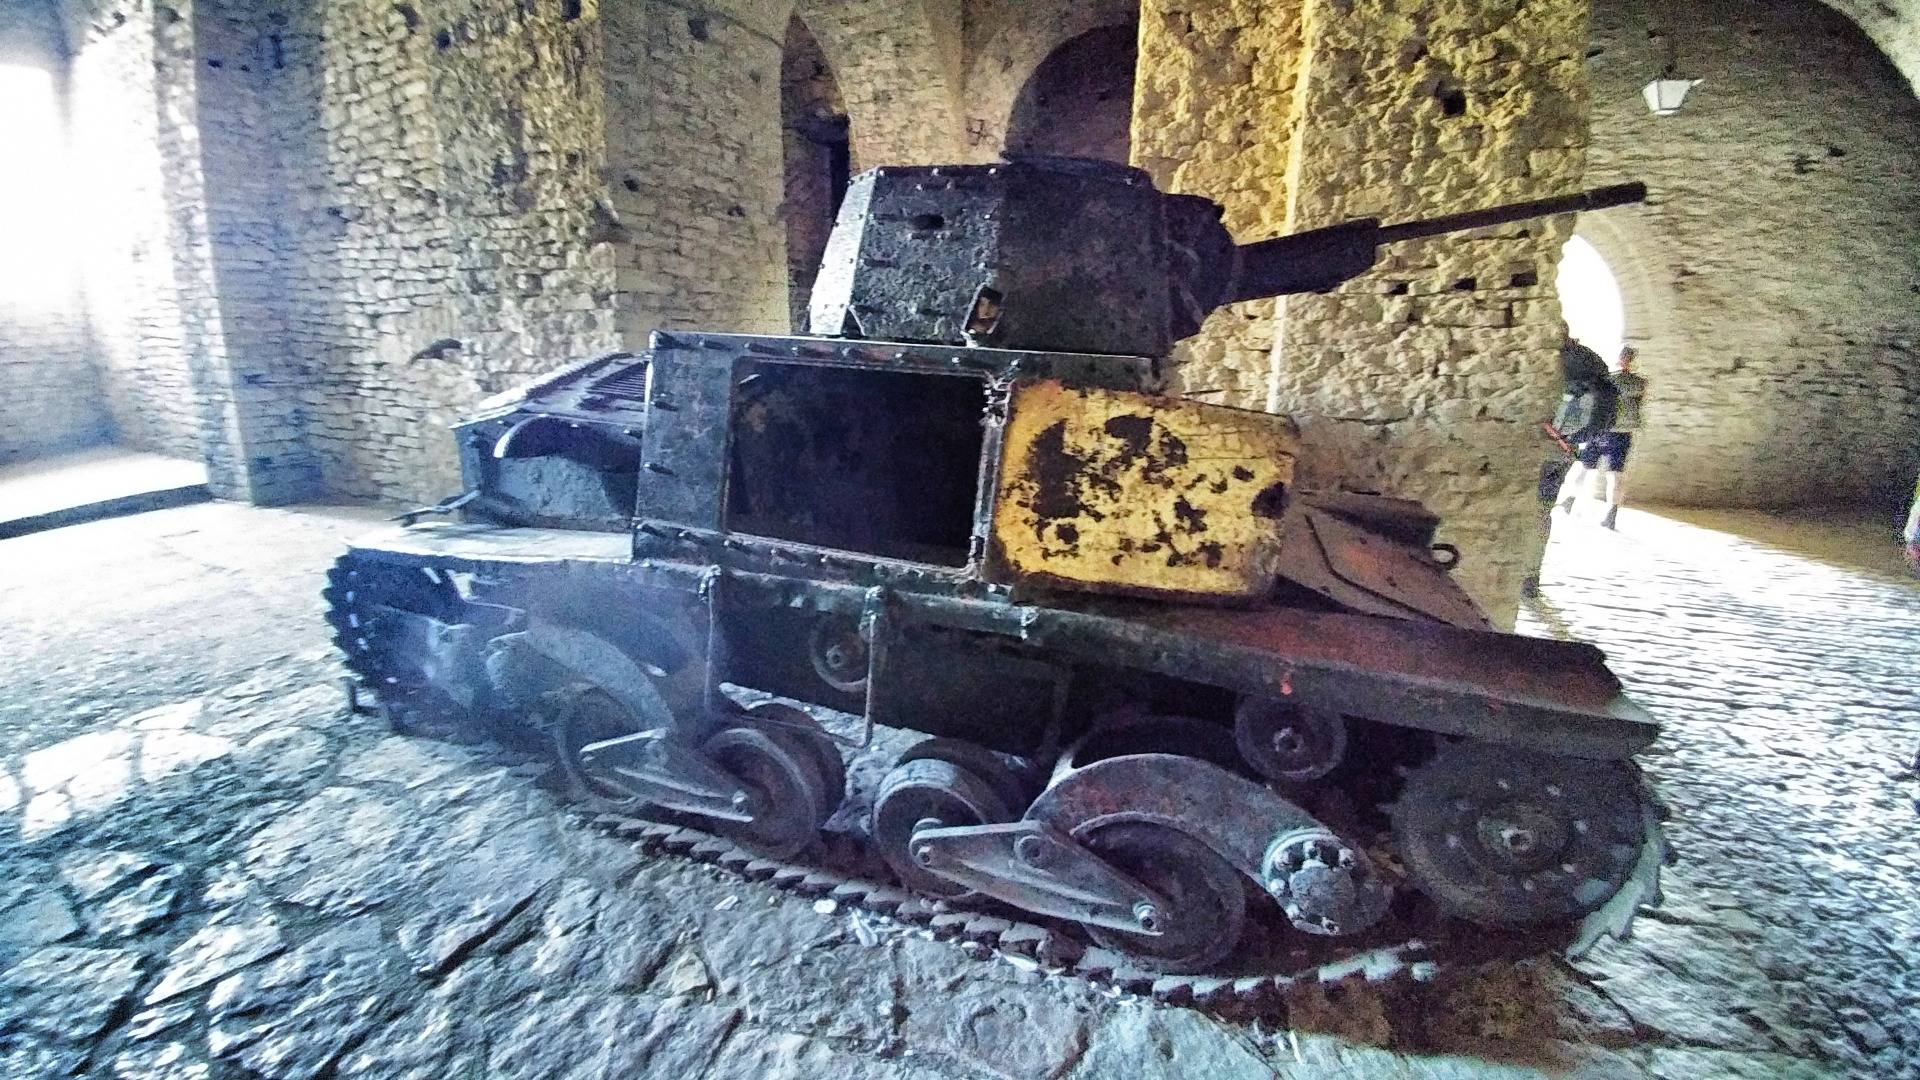 A tank thats seems it was used thousand years ago